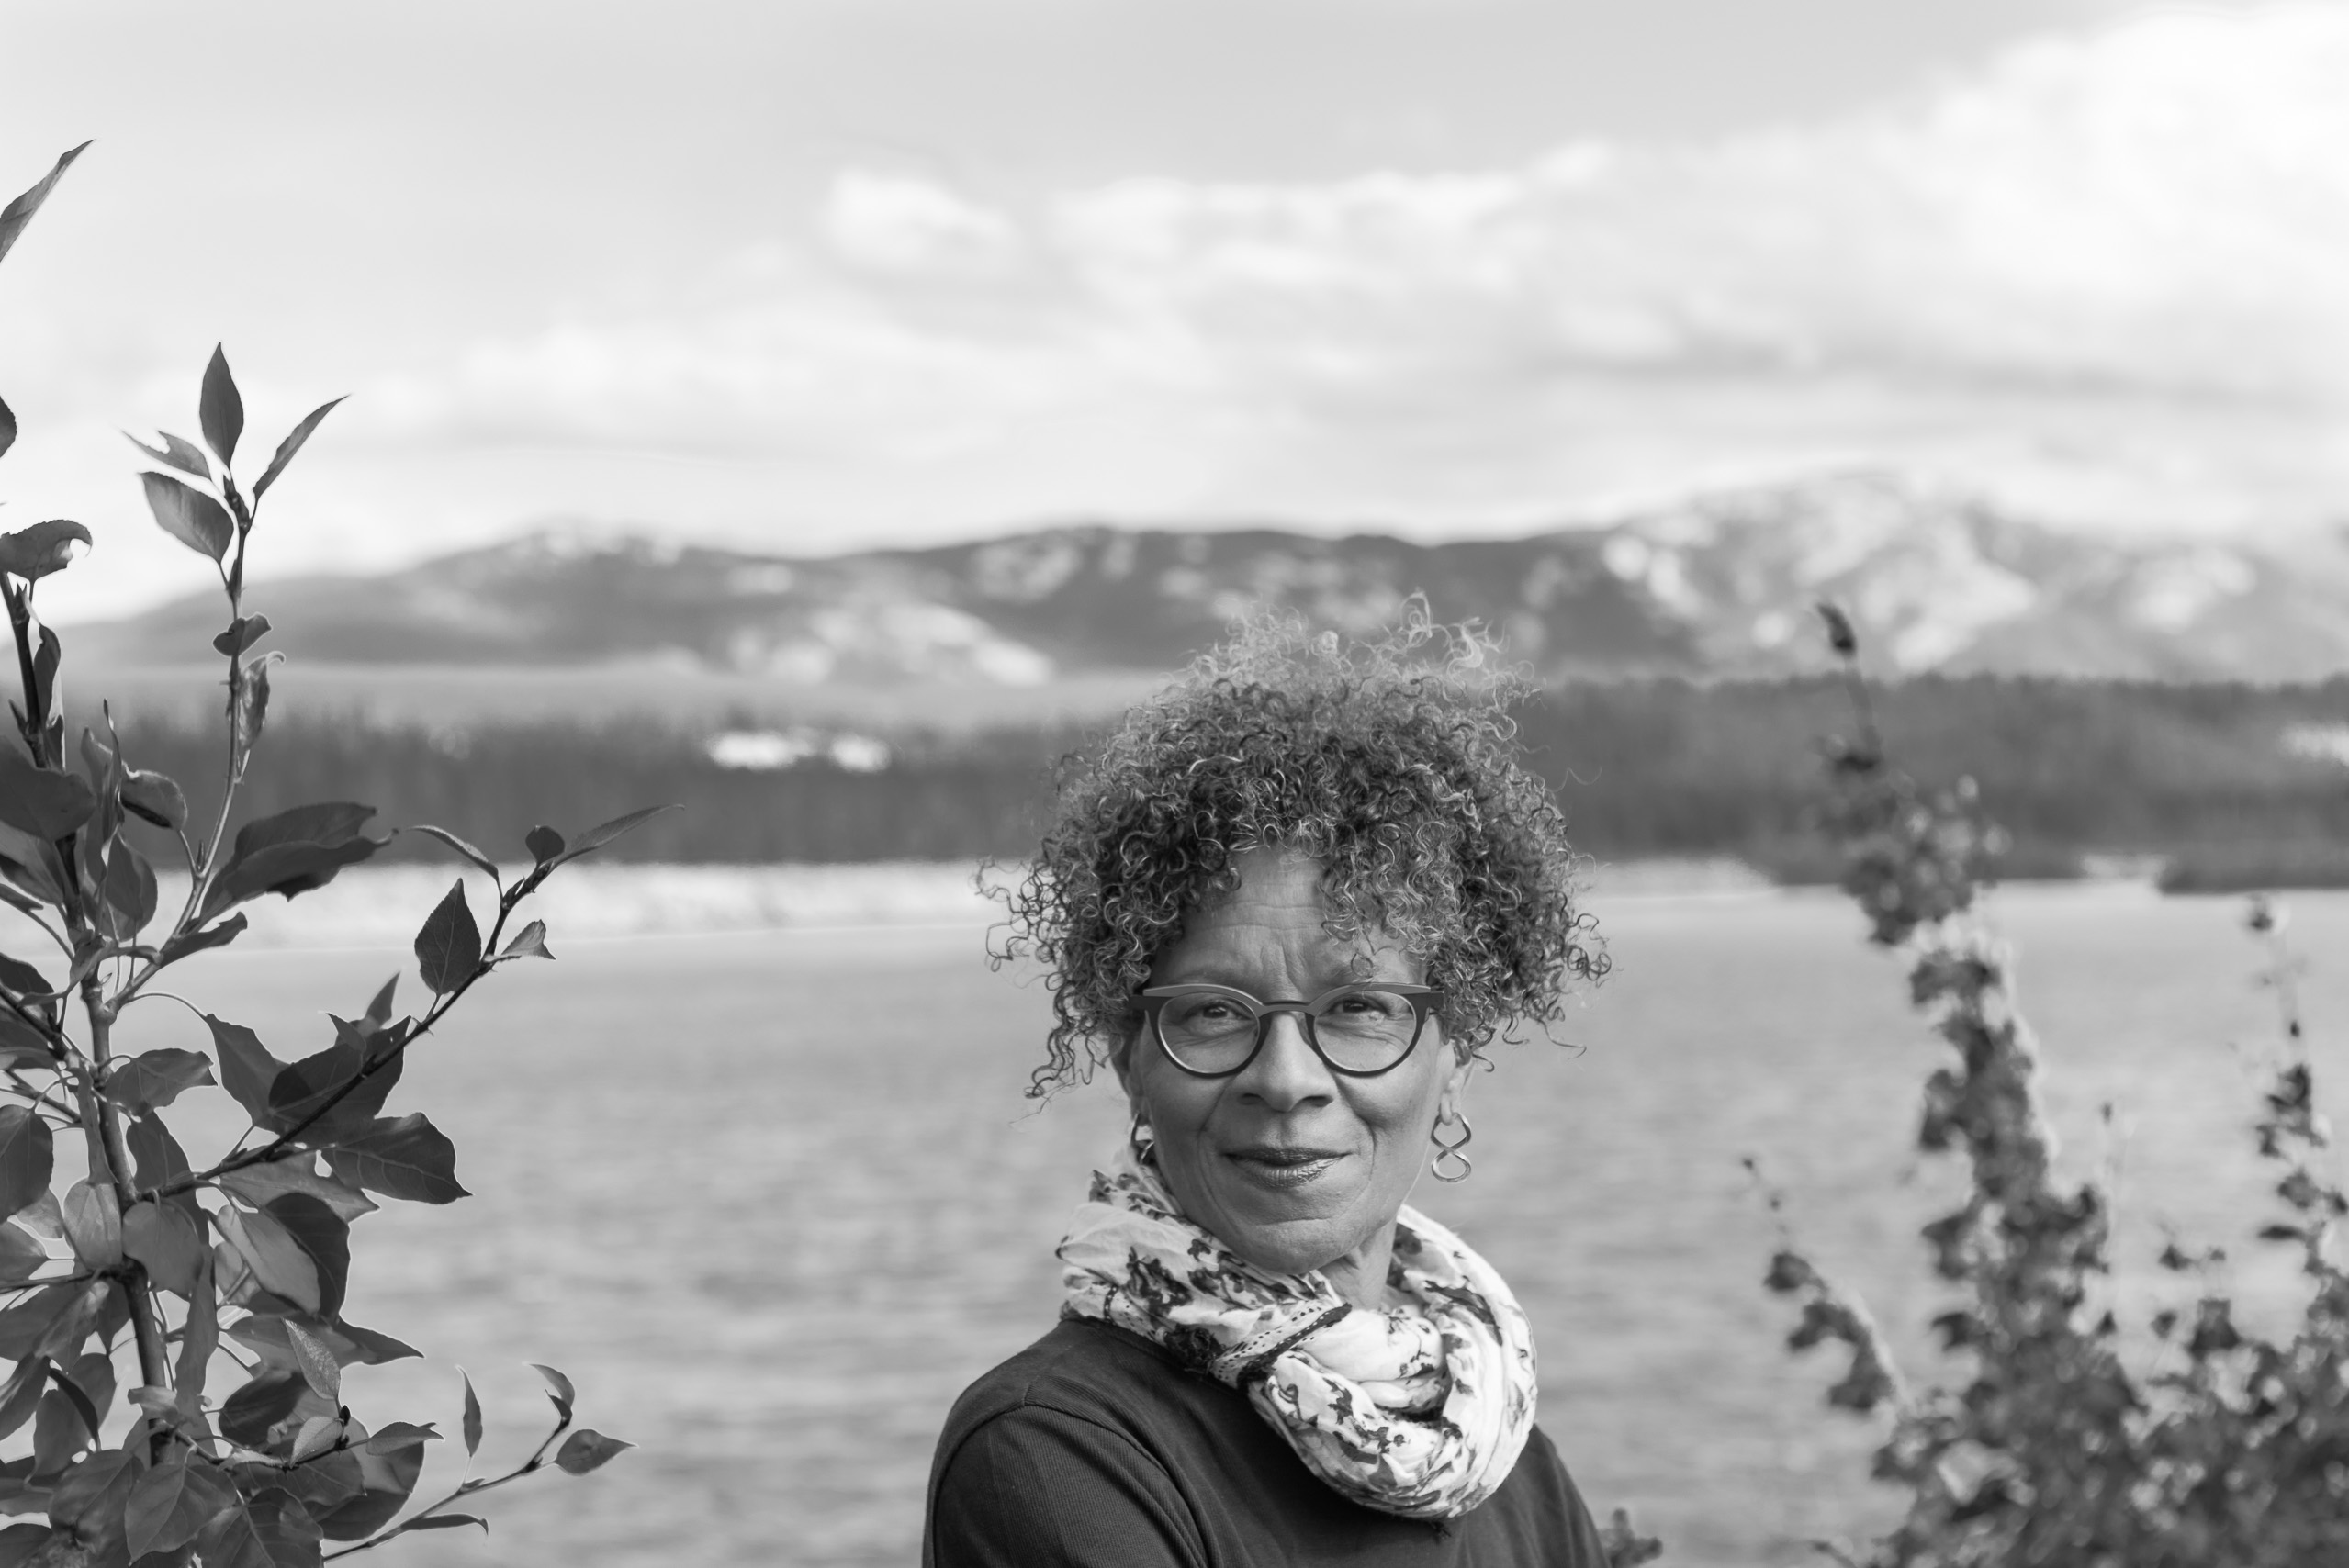 Tina Brobby has curly hair, chunky glasses, earrings, and a scarf in this black and white photo taken outdoors before a body of water with mountains in the background and foliage around the frame.